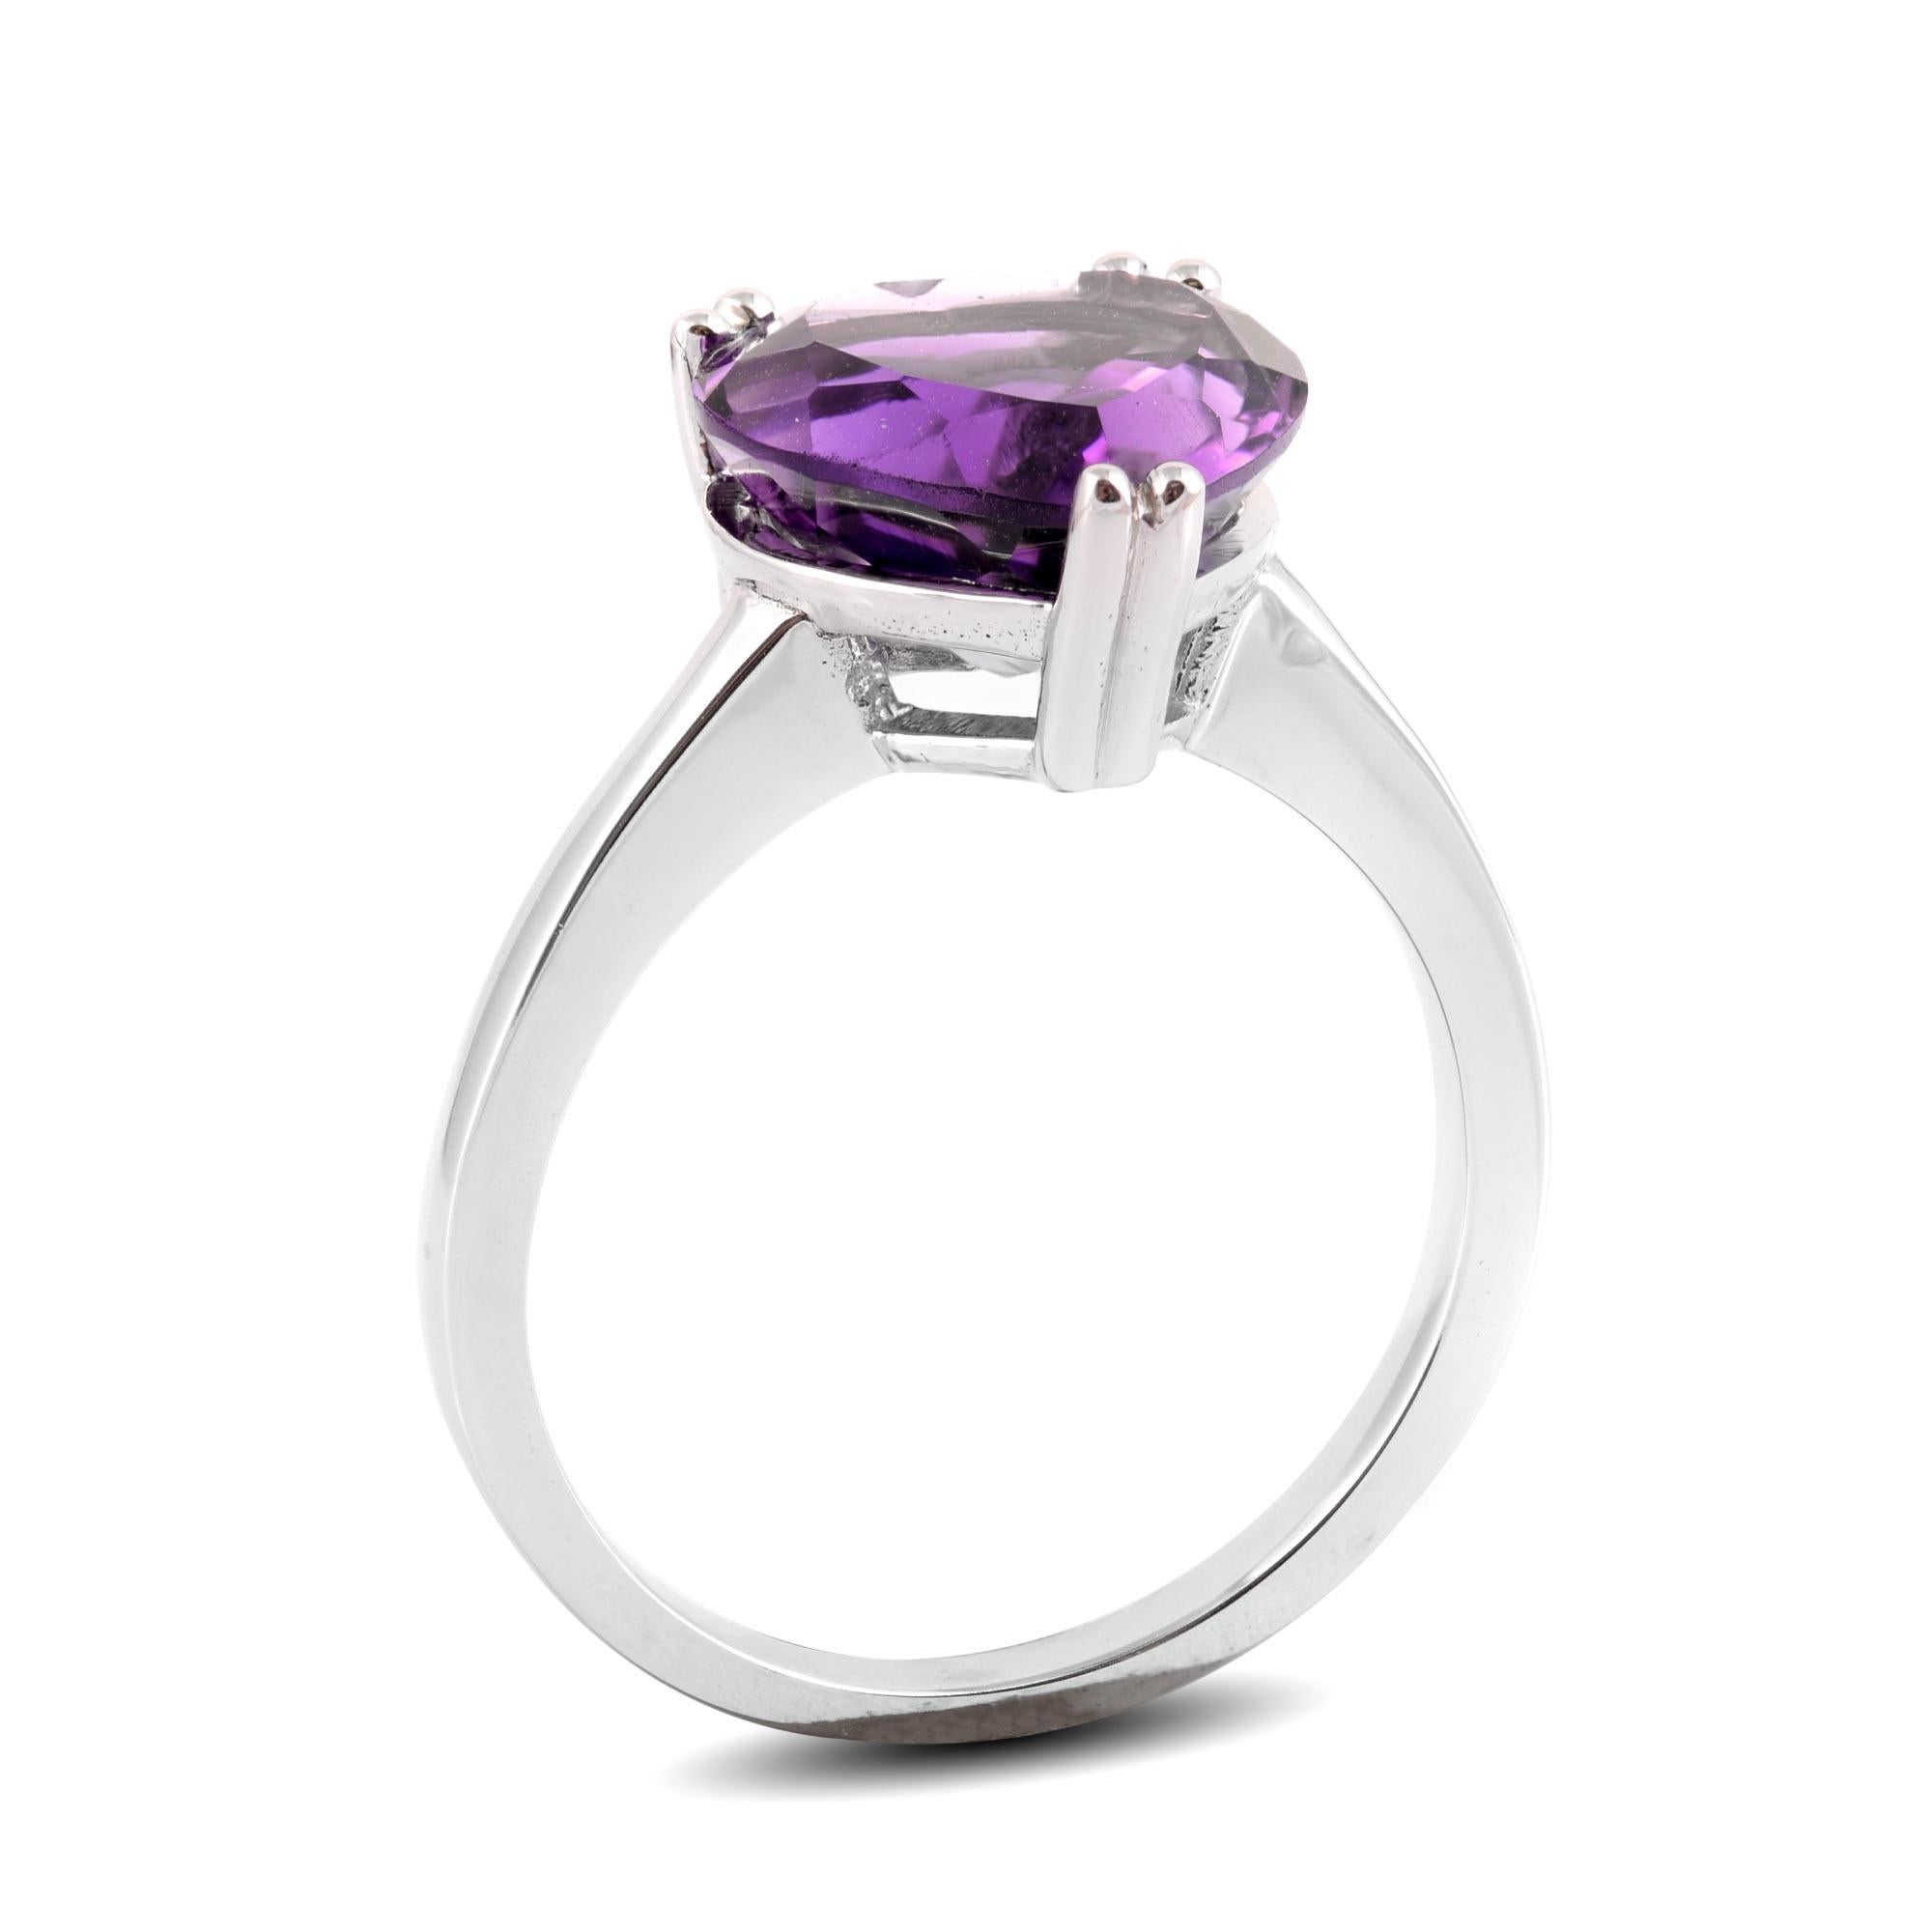 A color that has a glorious avatar, here is a 4.01 carat Amethyst that set in 14K White Gold. Allowing light to create the spectacle intended, this beautiful gemstone has unmatched brilliance. With royal hues, the violet colored center stone will